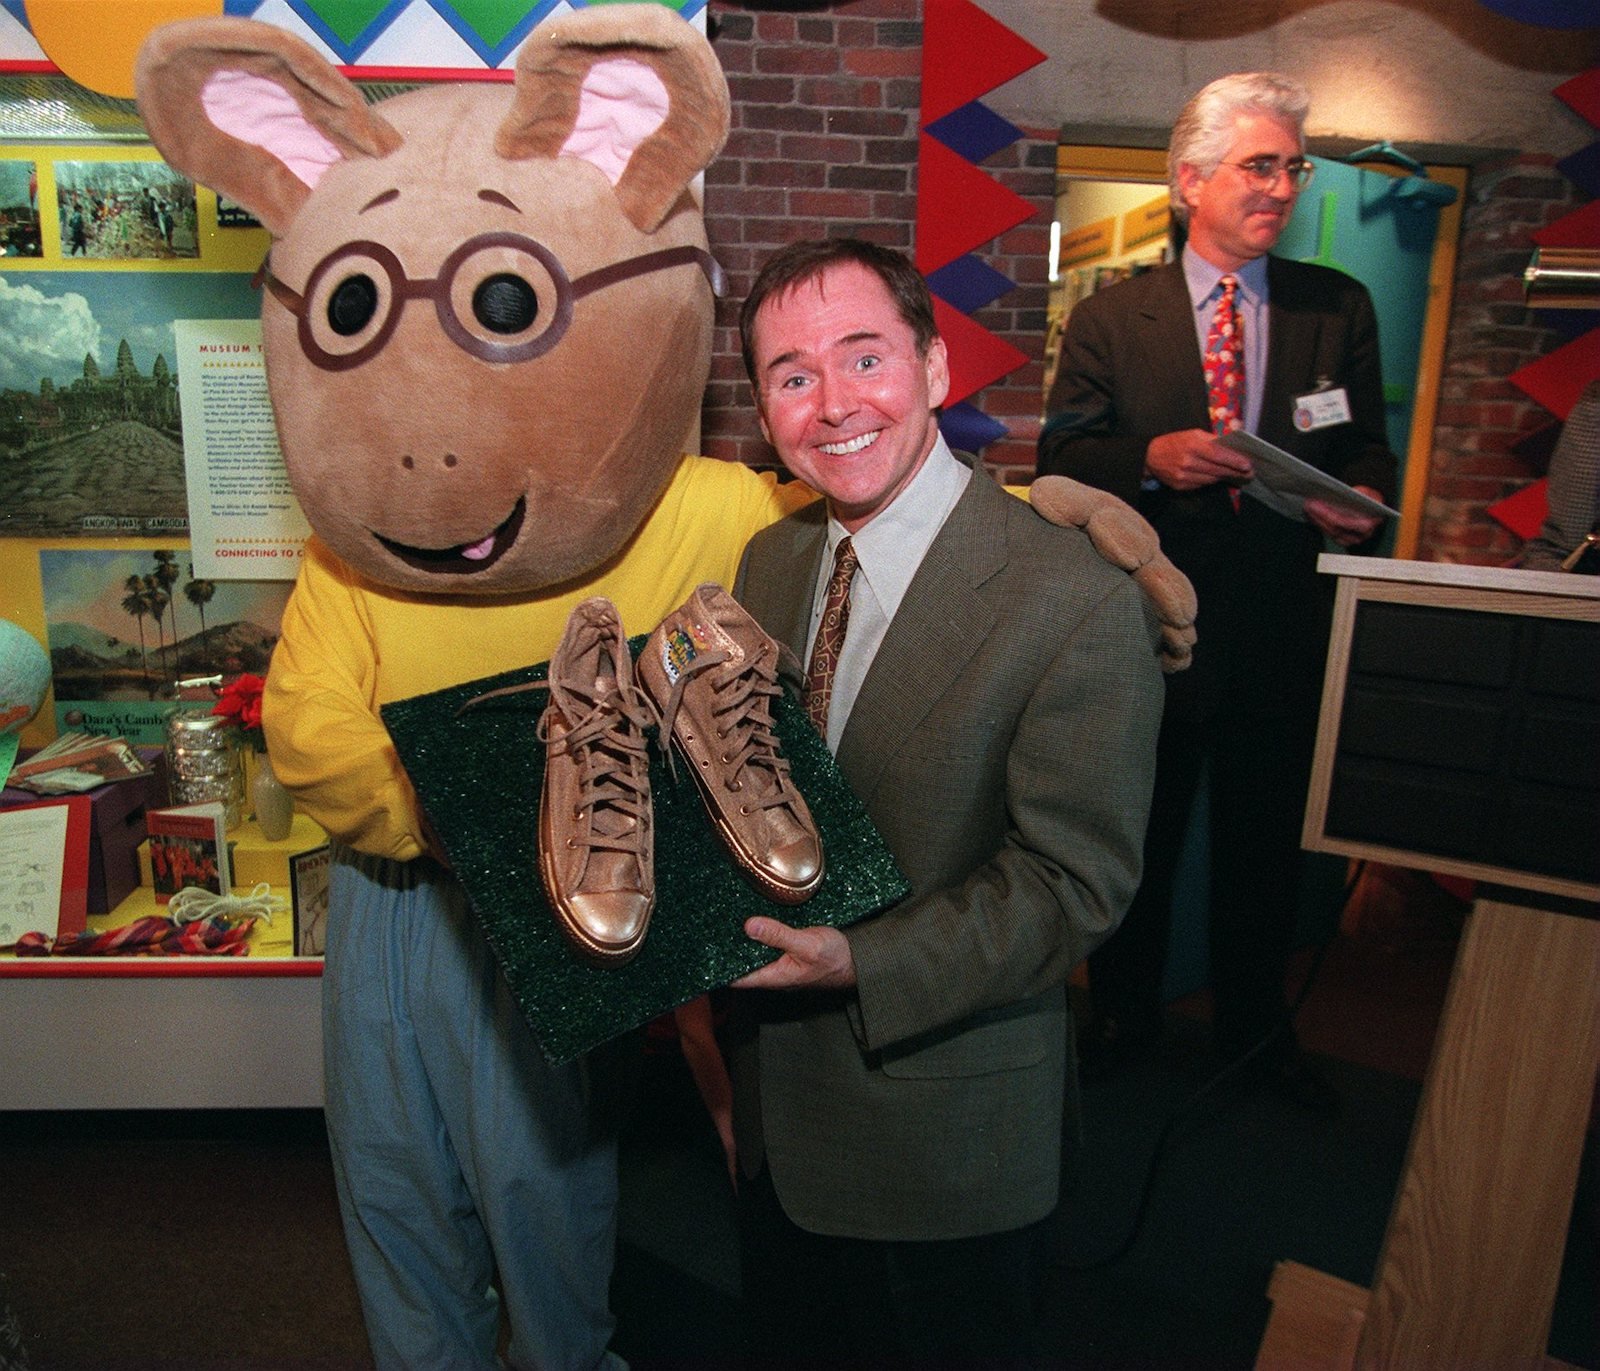 Arthur creator Marc Brown shows off a pair of sneakers that he was presented at the Boston Children's Museum